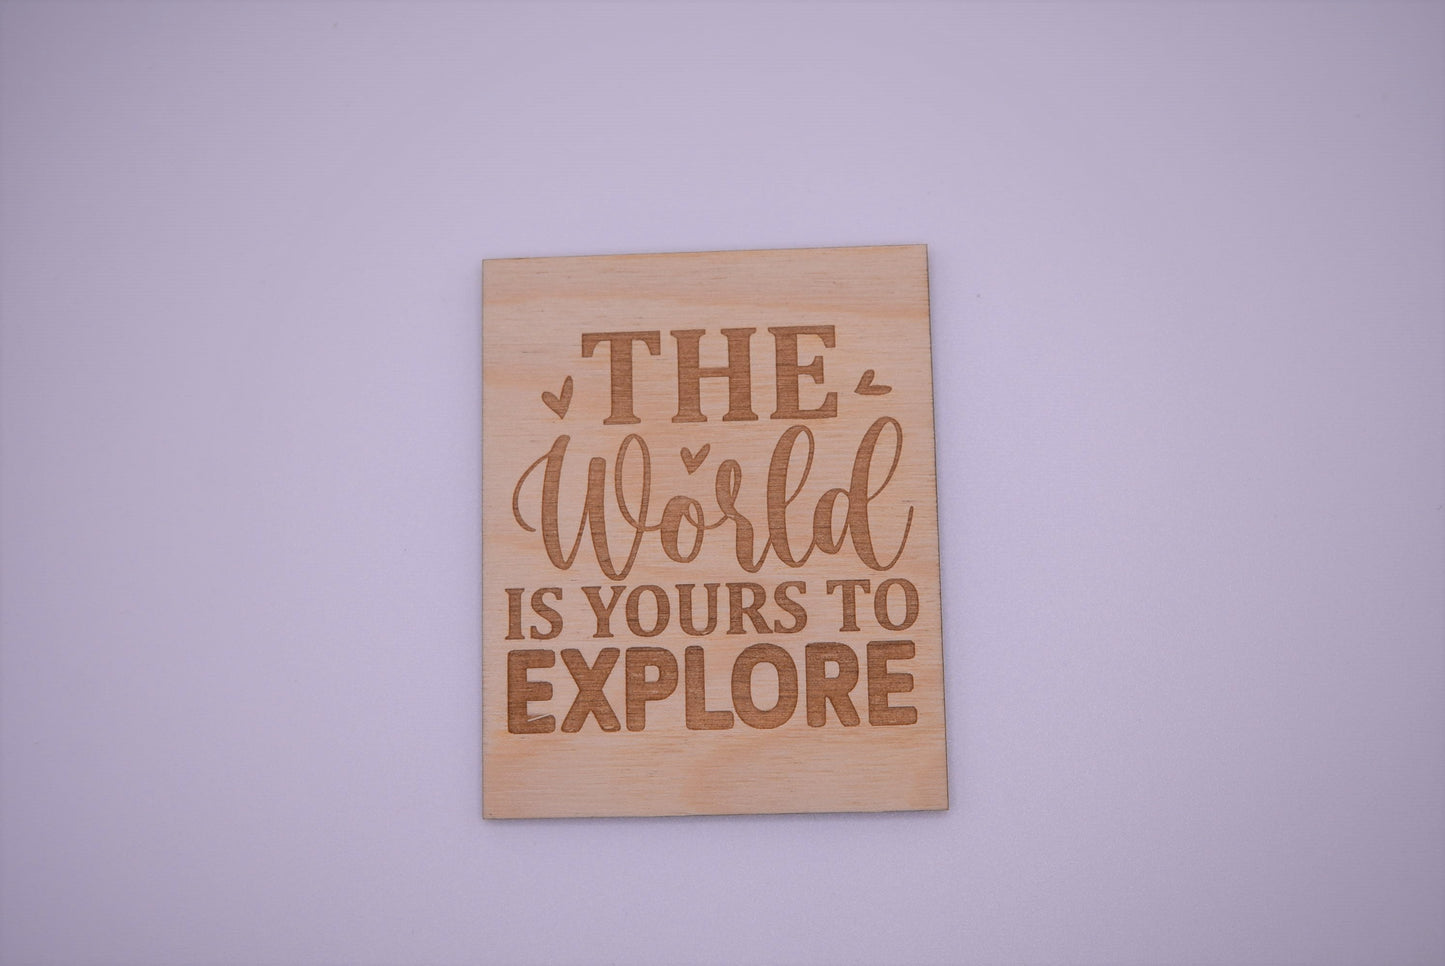 The world is yours to explore - Creative Designs By Kari